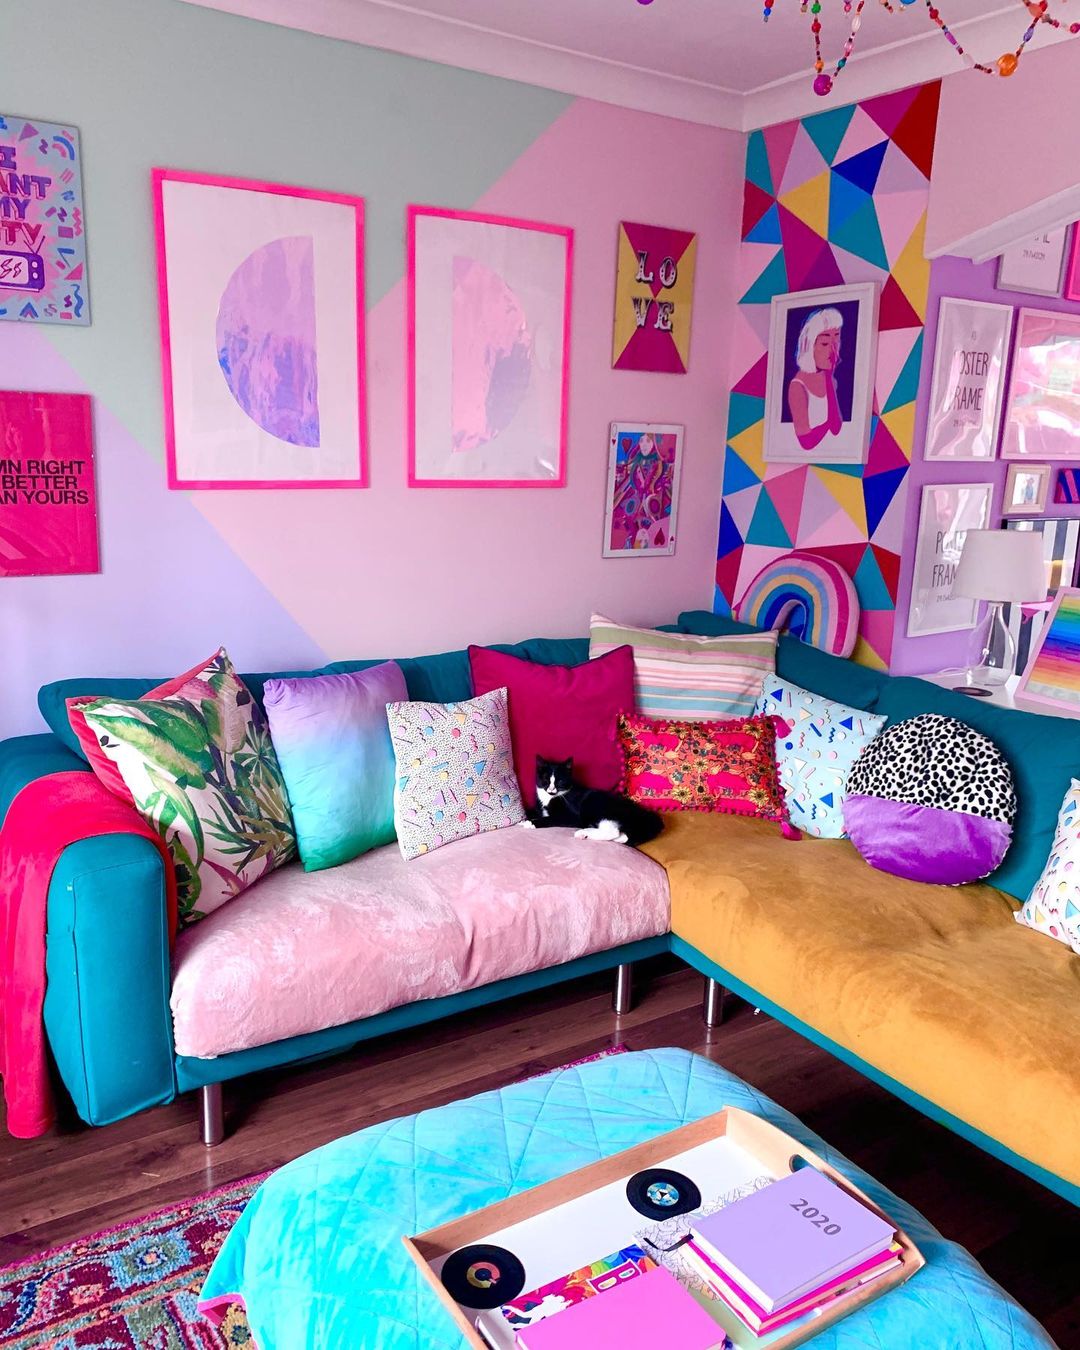 Living Area Painted Bright Pink with Vibrant Art Pieces. Photo by Instagram user @rachaelhavenhanddesign